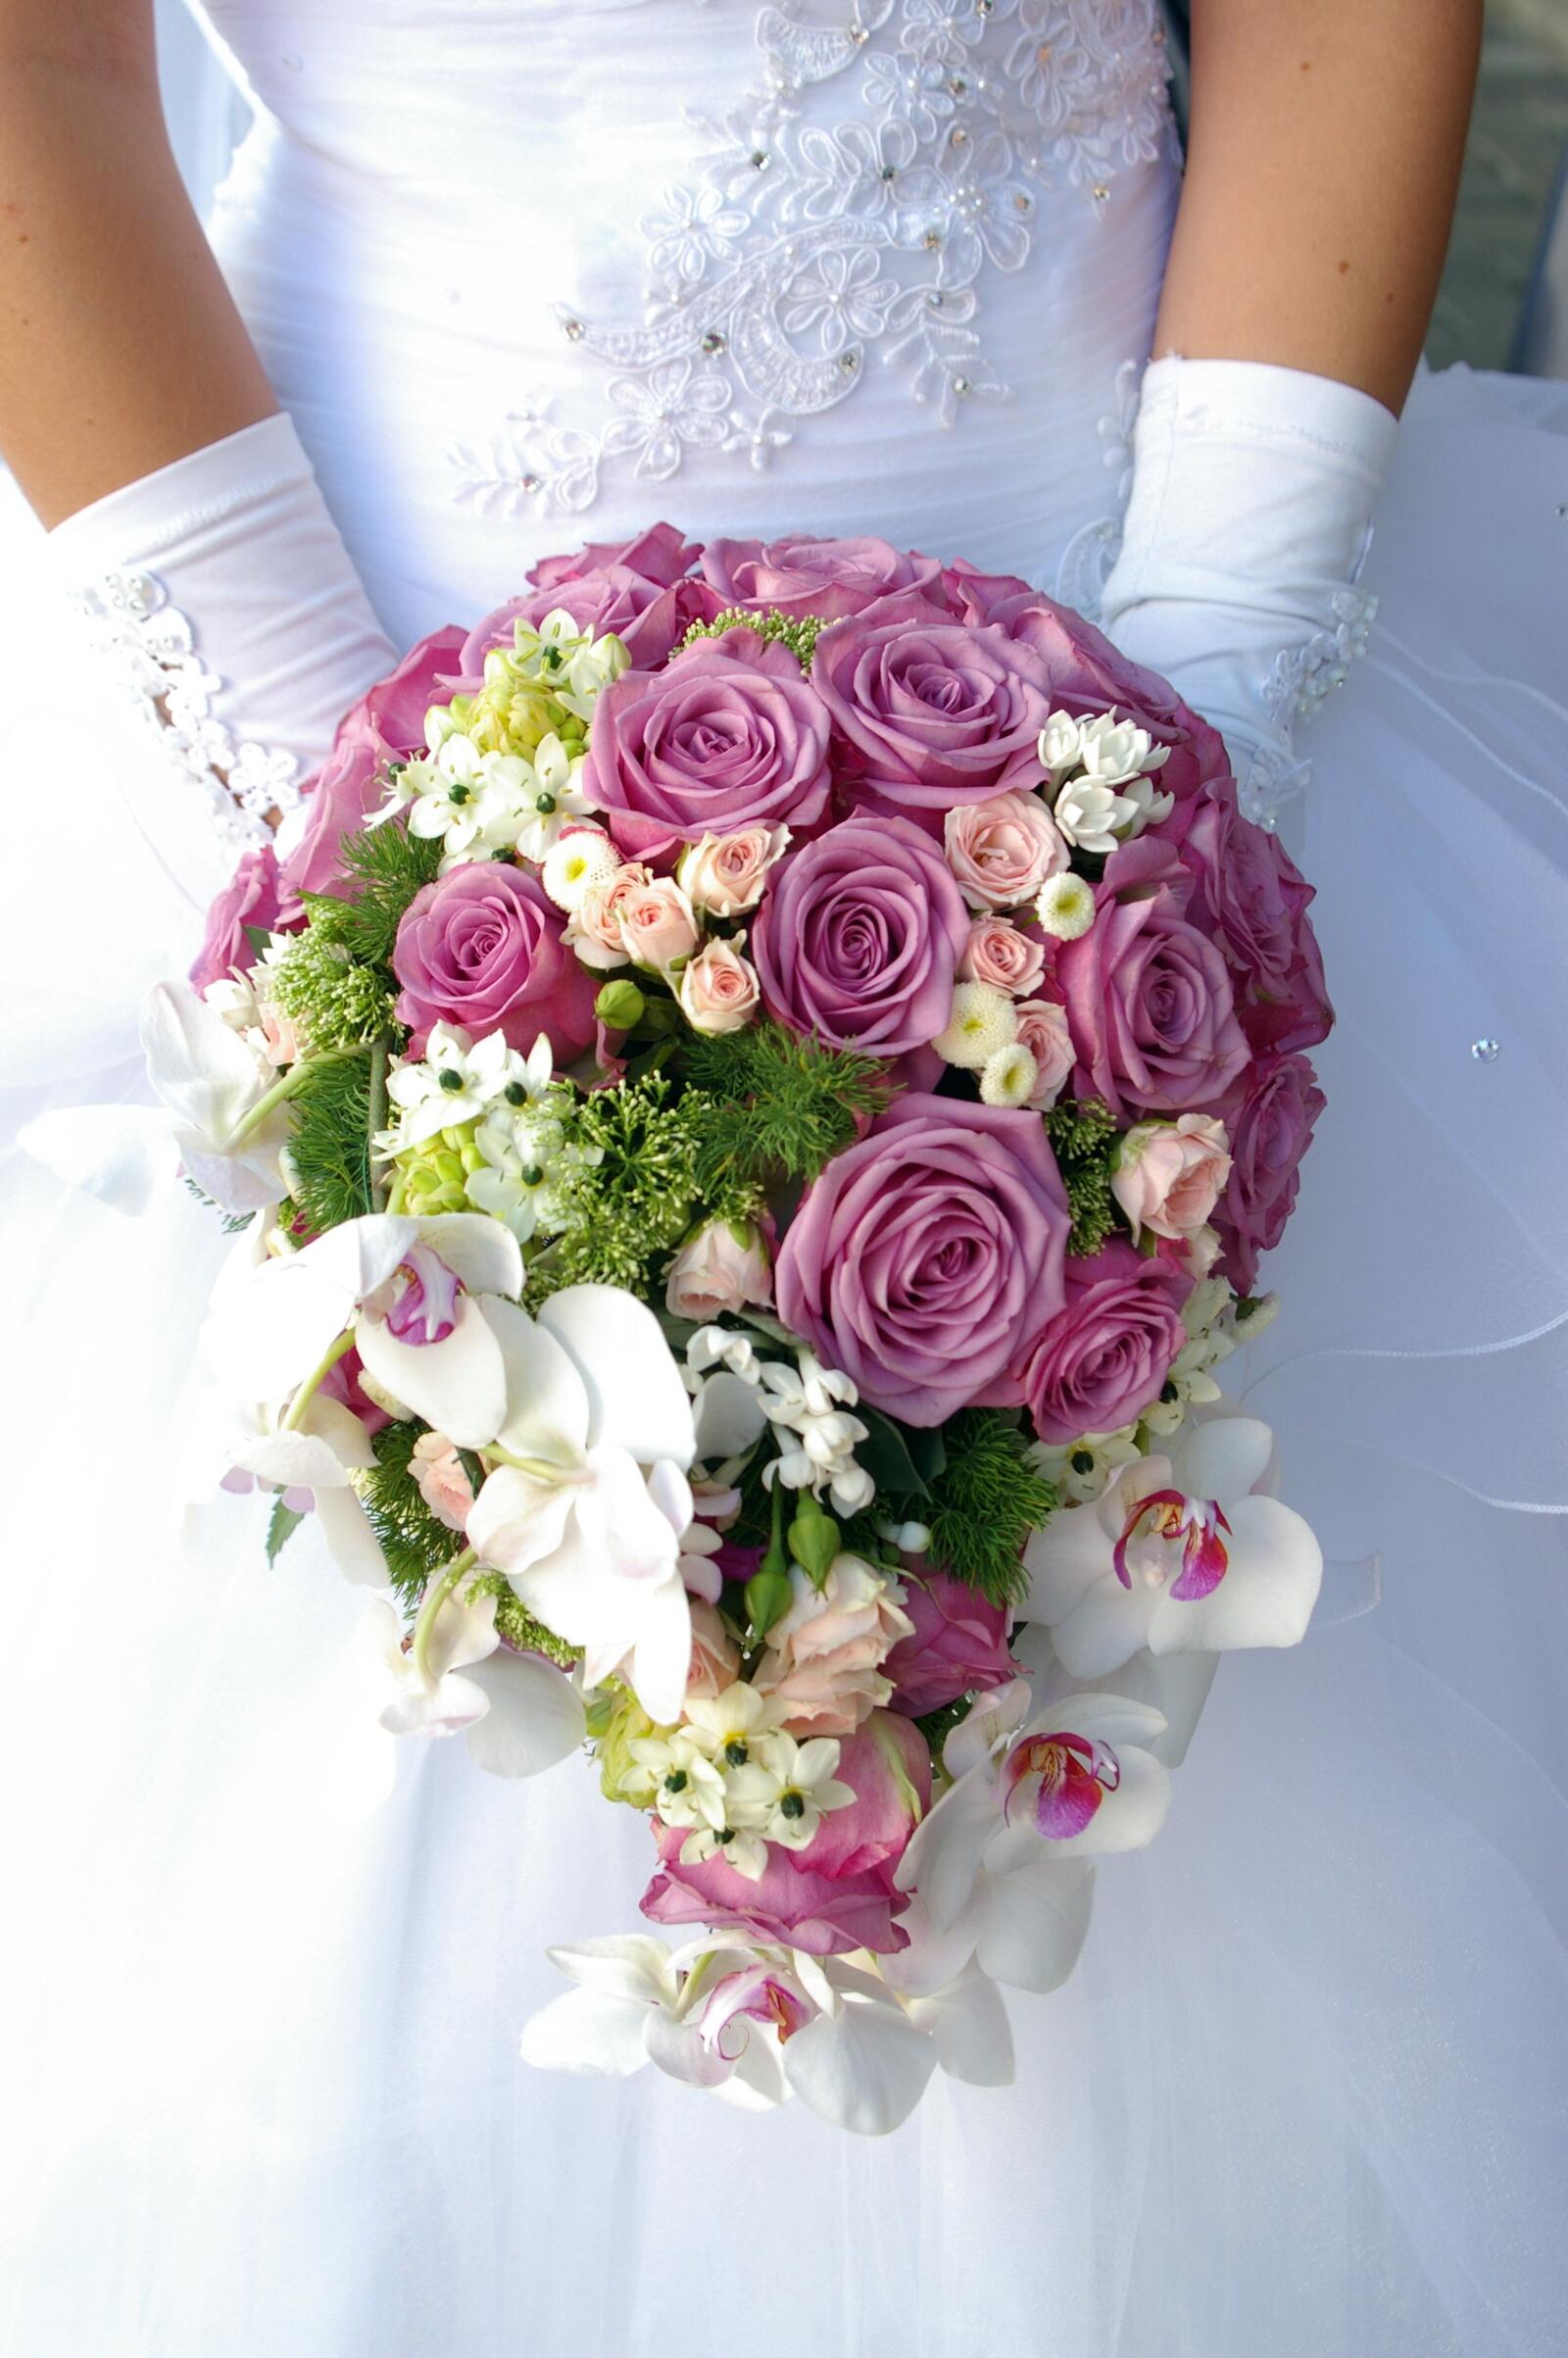 Free photo A bride with a gorgeous wedding bouquet of roses